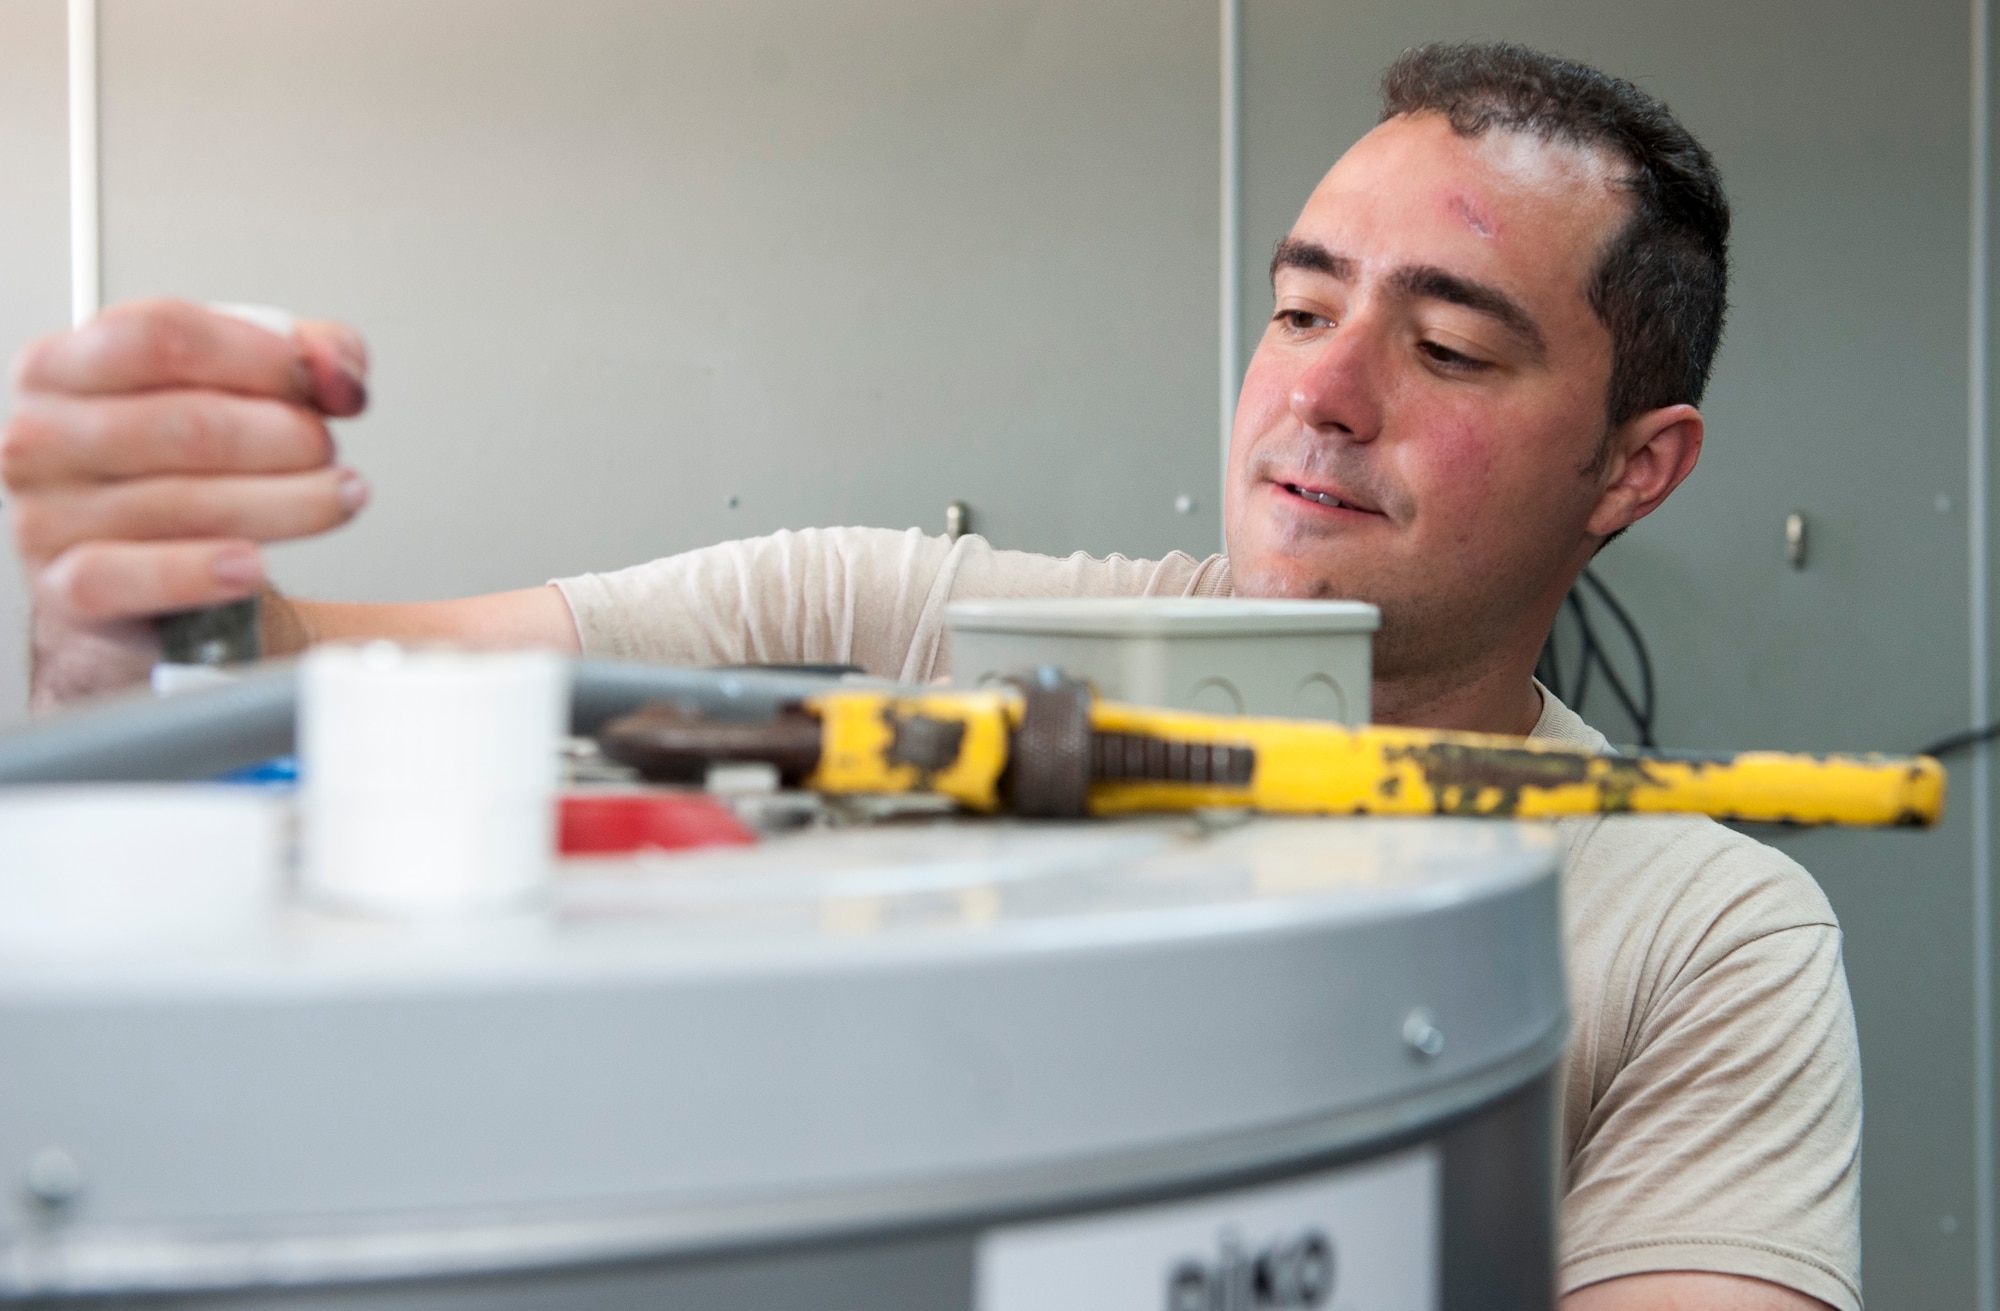 U.S. Air Force Staff Sgt. Ryan Bombardiere, 48th Civil Engineer Squadron (CES) water fuels system maintenance technician, repairs a water heater July 28, 2016, at Incirlik Air Base, Turkey. Servicemembers from across U.S. Air Forces in Europe-Air Forces Africa came on temporary duty after a request for forces was submitted by the 39th CES. (U.S. Air Force photo by Staff Sgt. Jack Sanders)